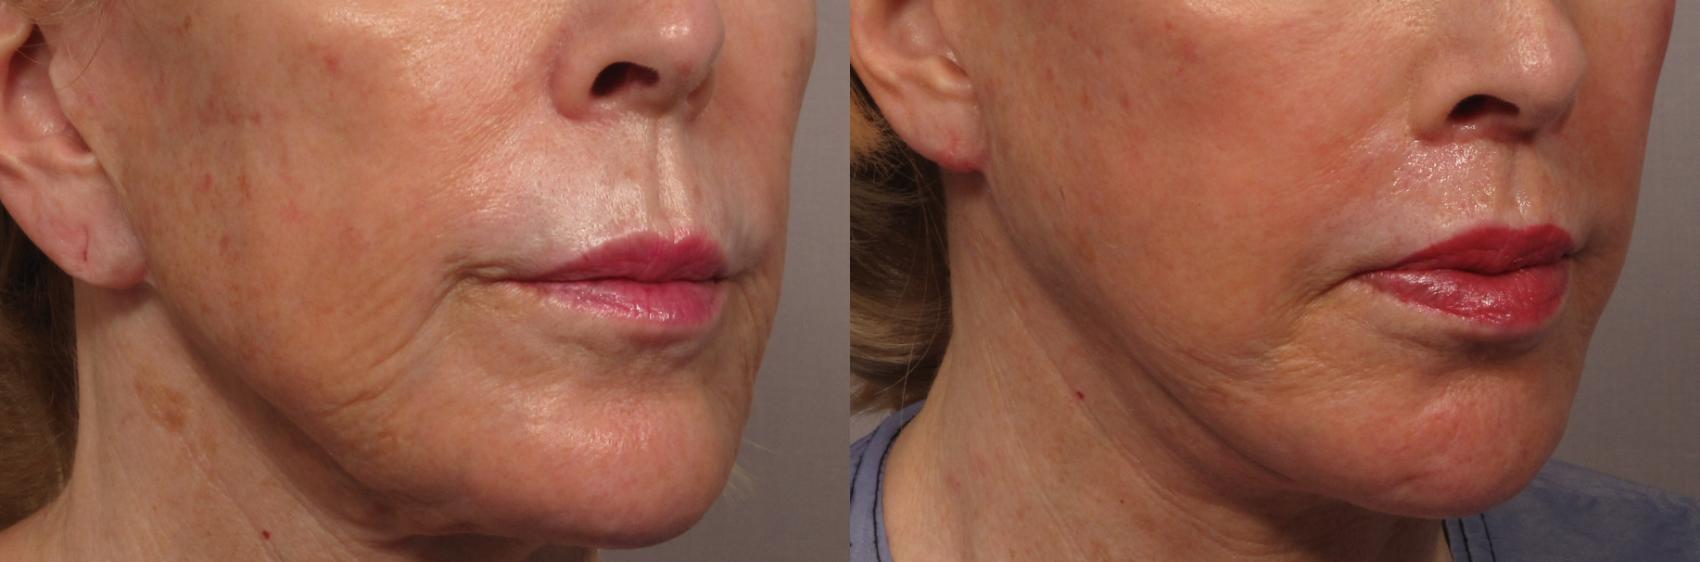 Before Right Oblique photo after facelift, fat grafting and upper lip lift